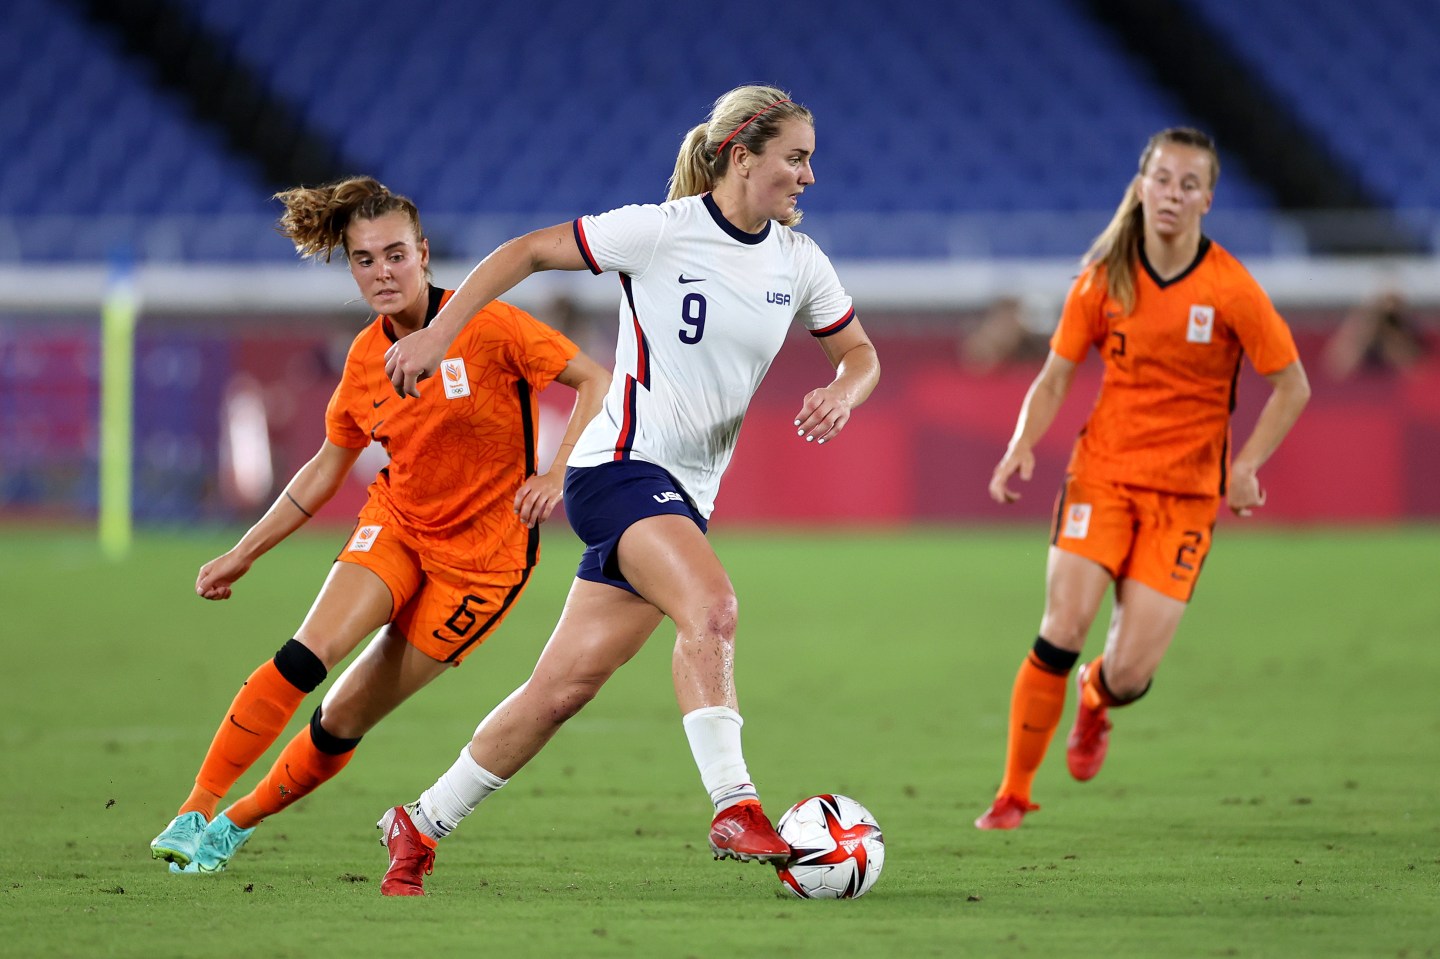 Lindsey Horan playing the Quarter Final match between Netherlands and United States during the Tokyo 2020 Olympic Games.